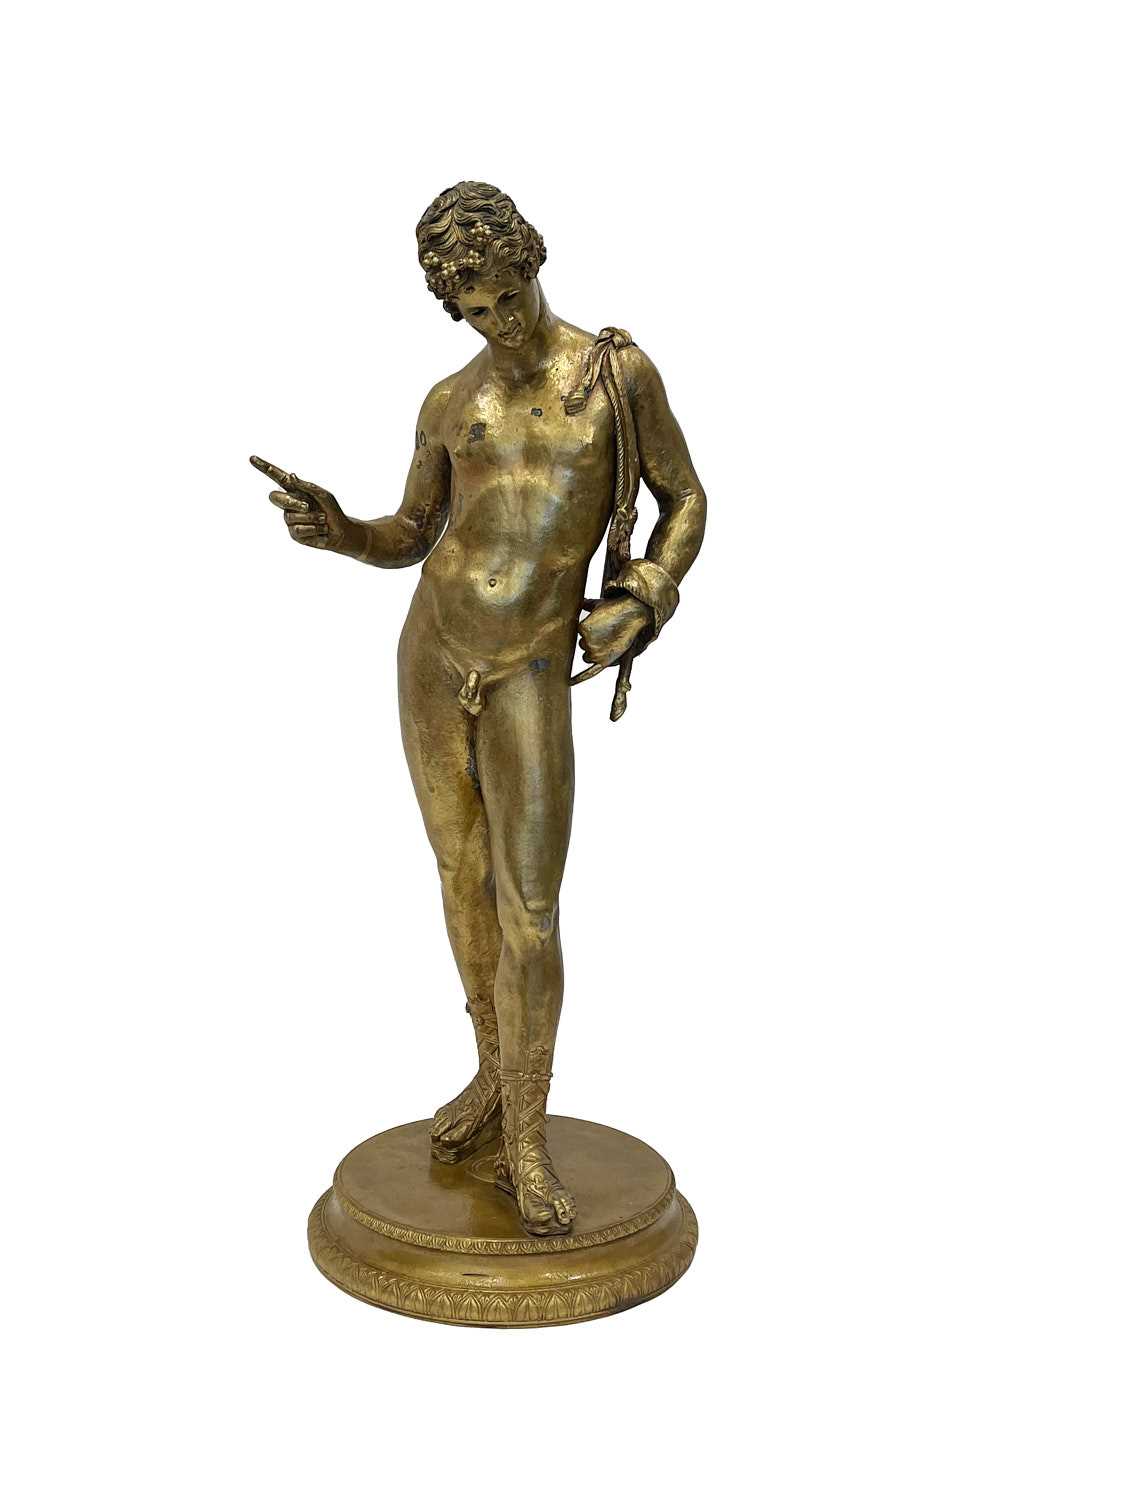 A 19TH CENTURY GRAND TOUR GILT BRONZE FIGURE OF NARCISSUS, AFTER THE ANTIQUE